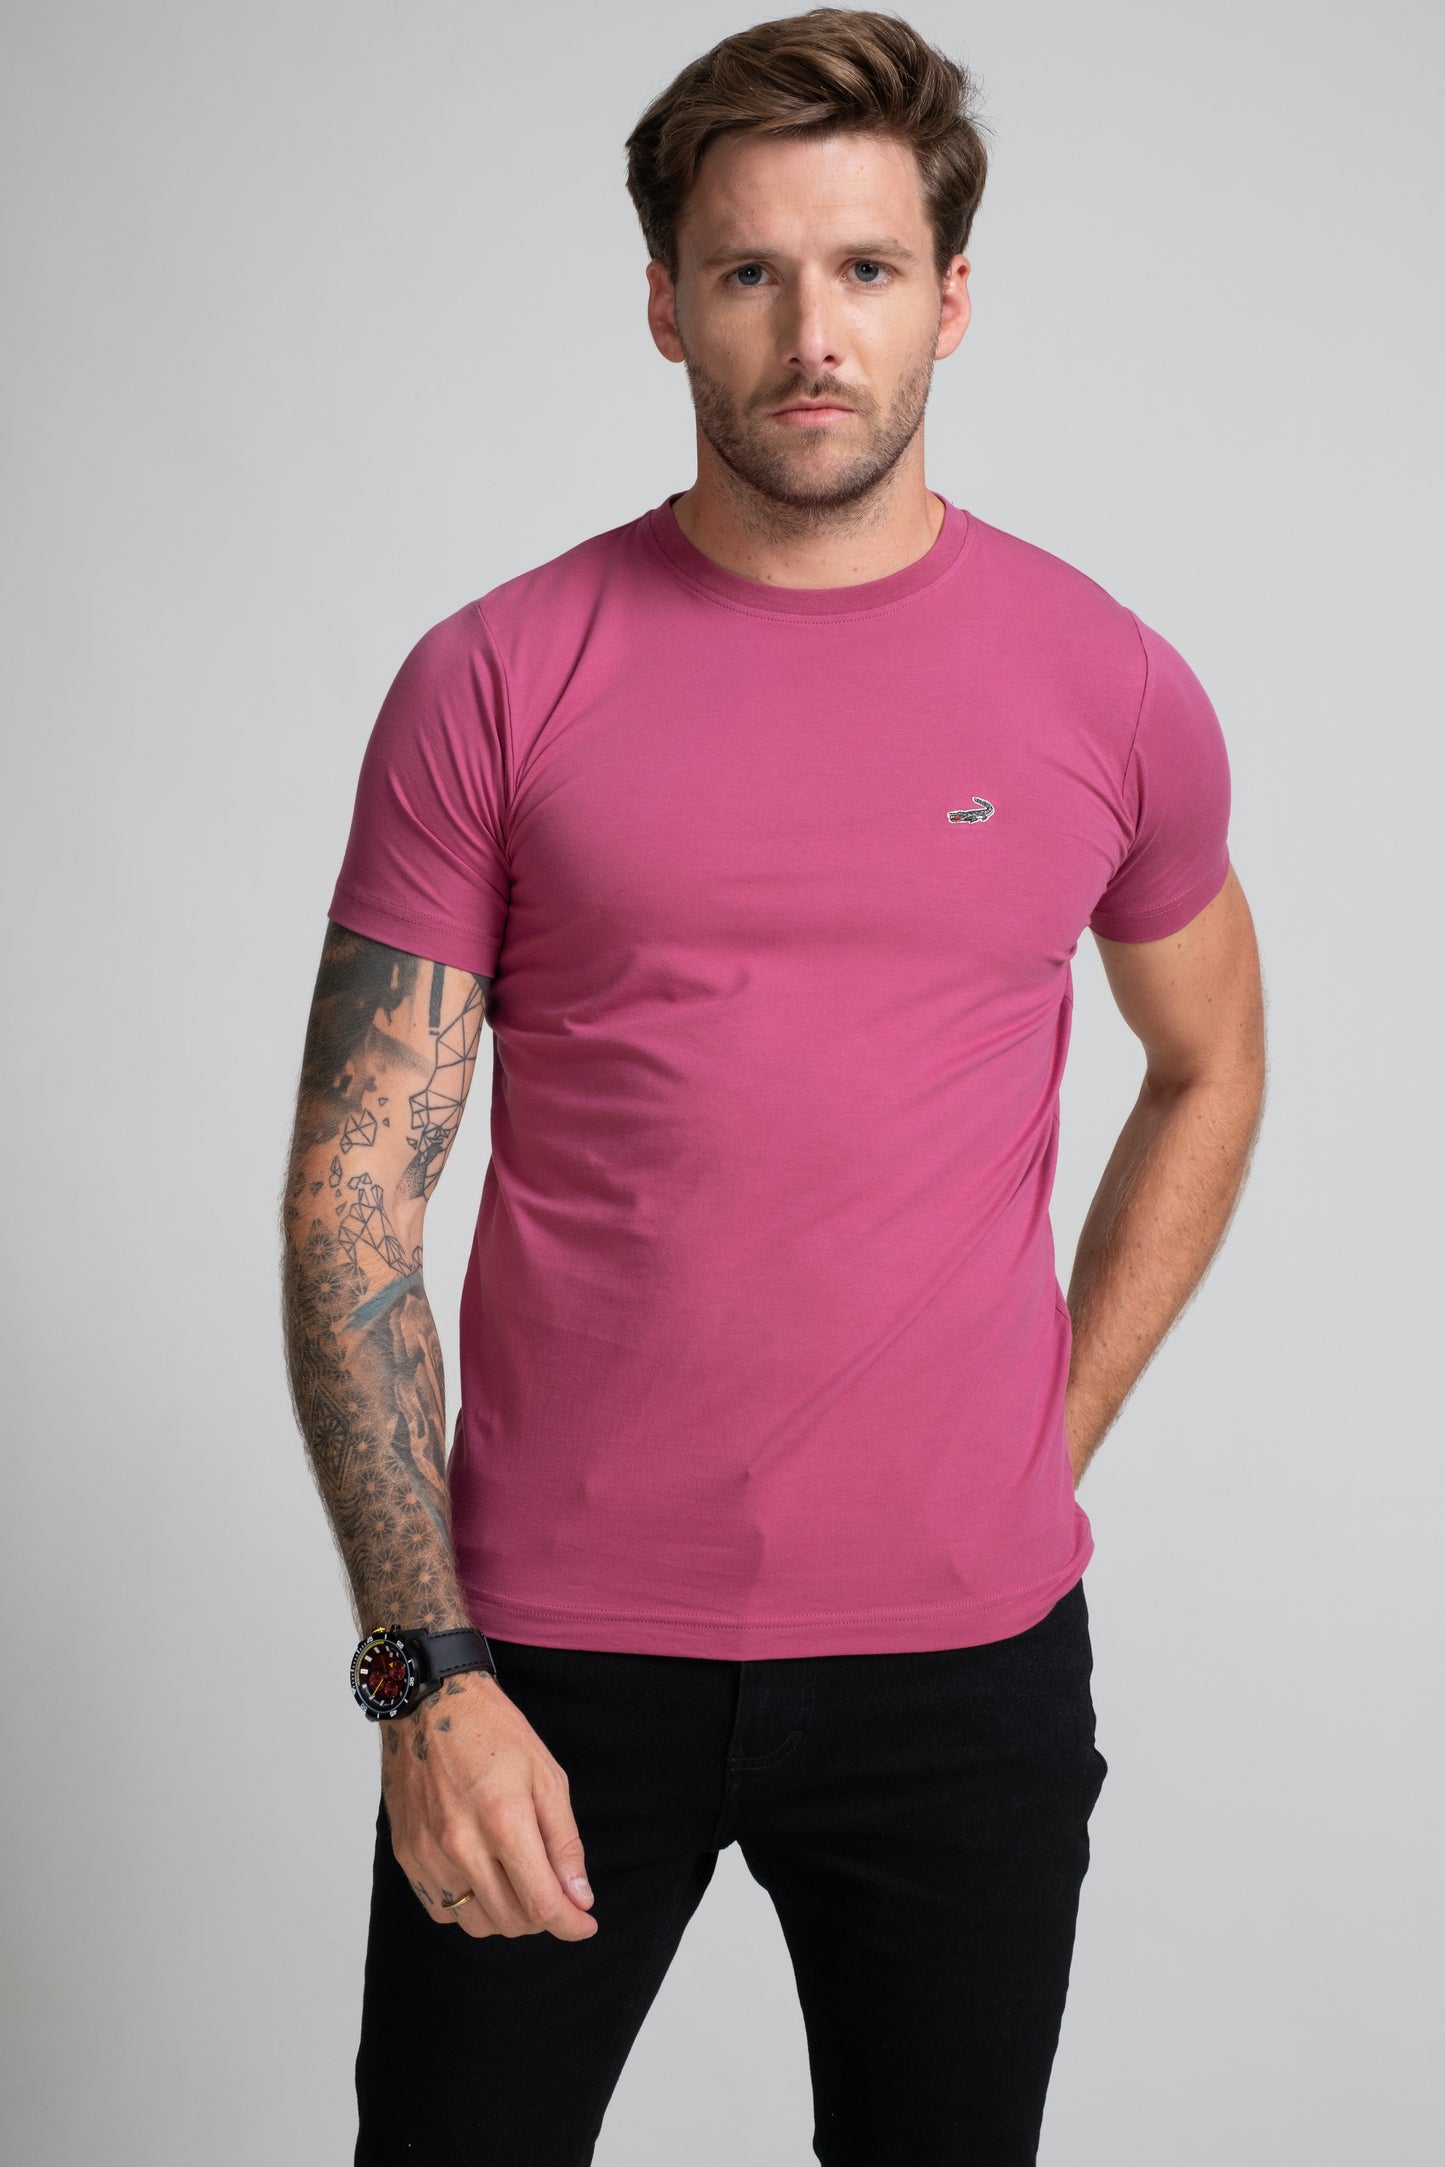 Action Fit Short sleeves-CasualCrew Neck - Very Berry